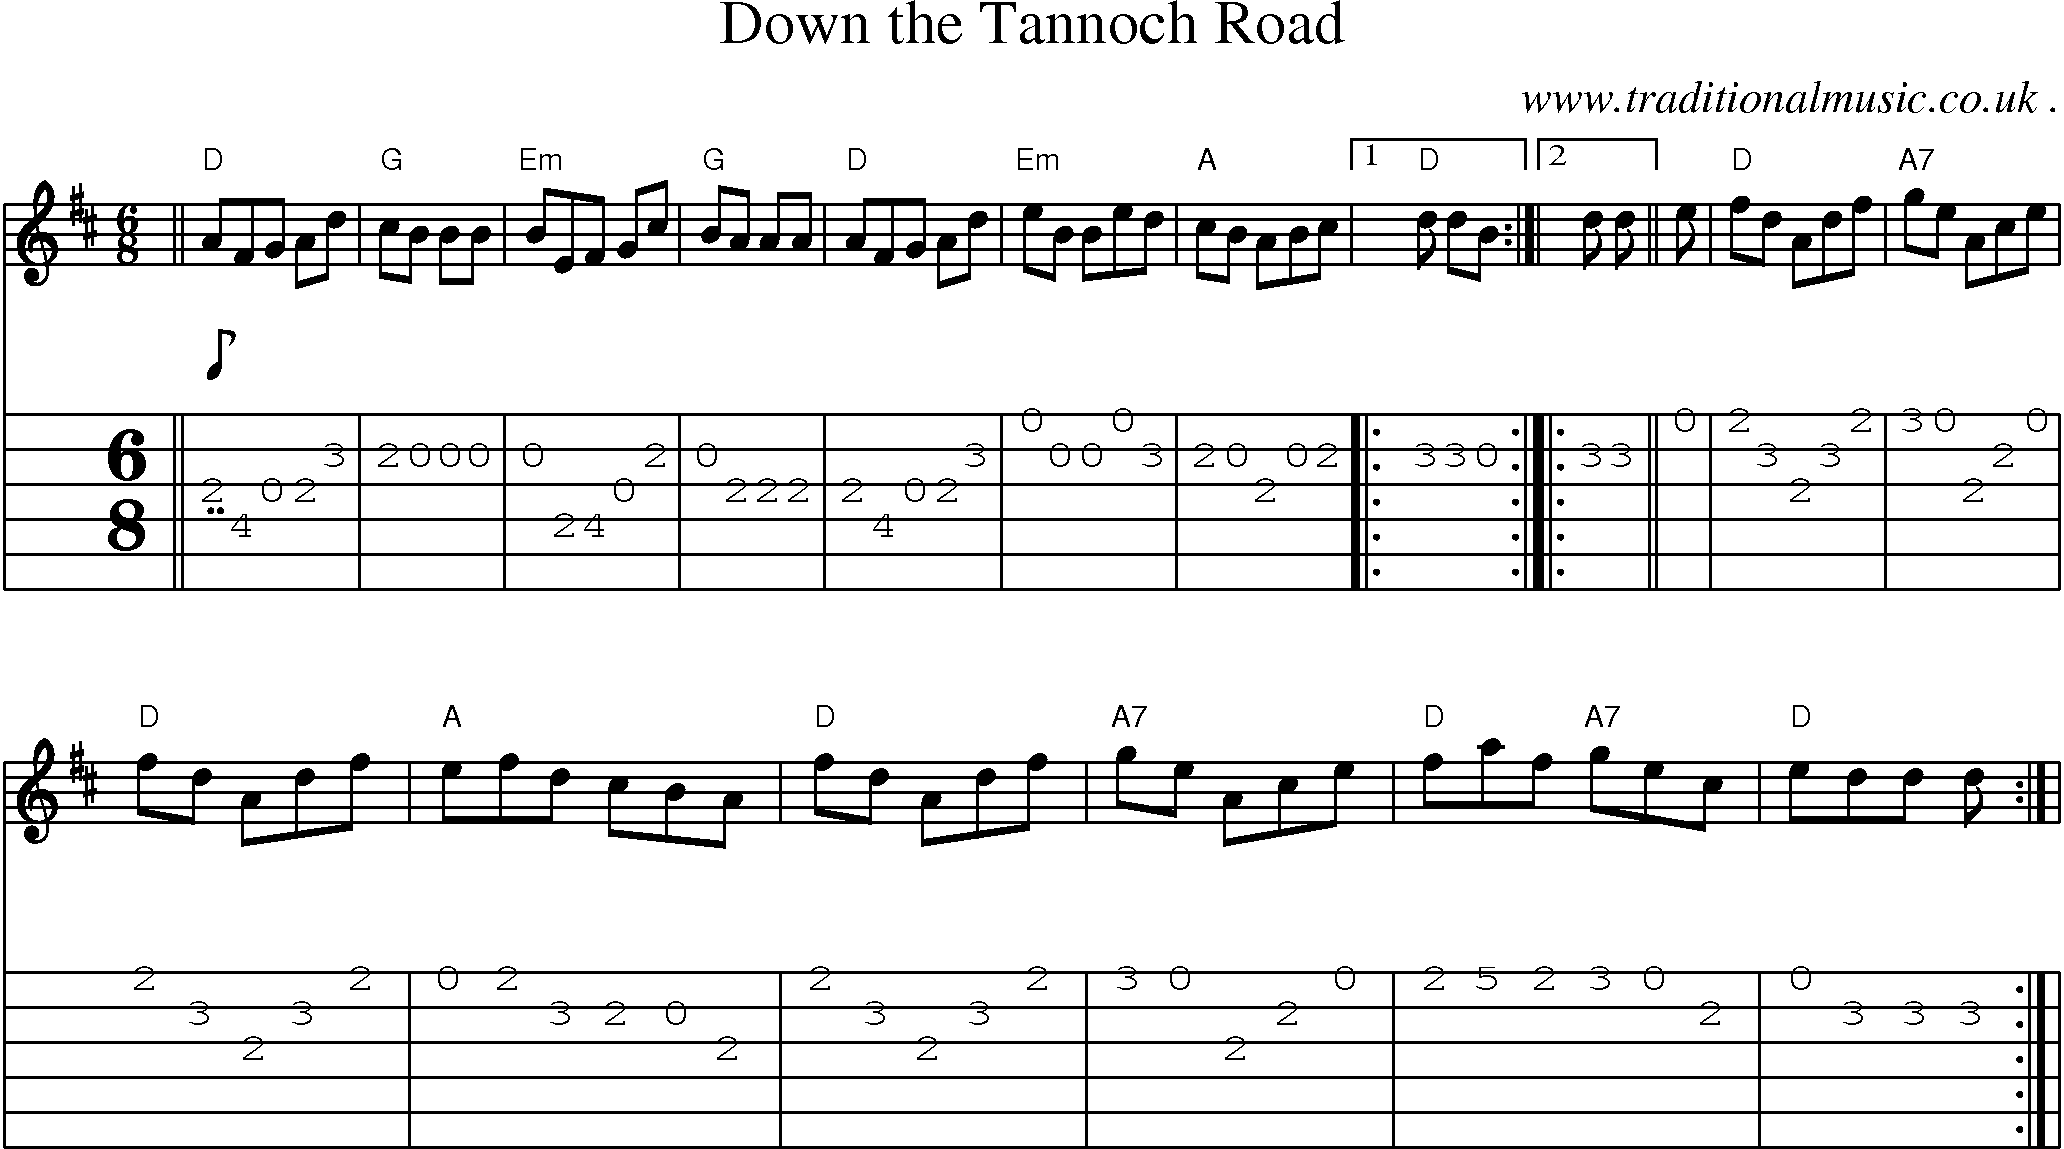 Sheet-music  score, Chords and Guitar Tabs for Down The Tannoch Road